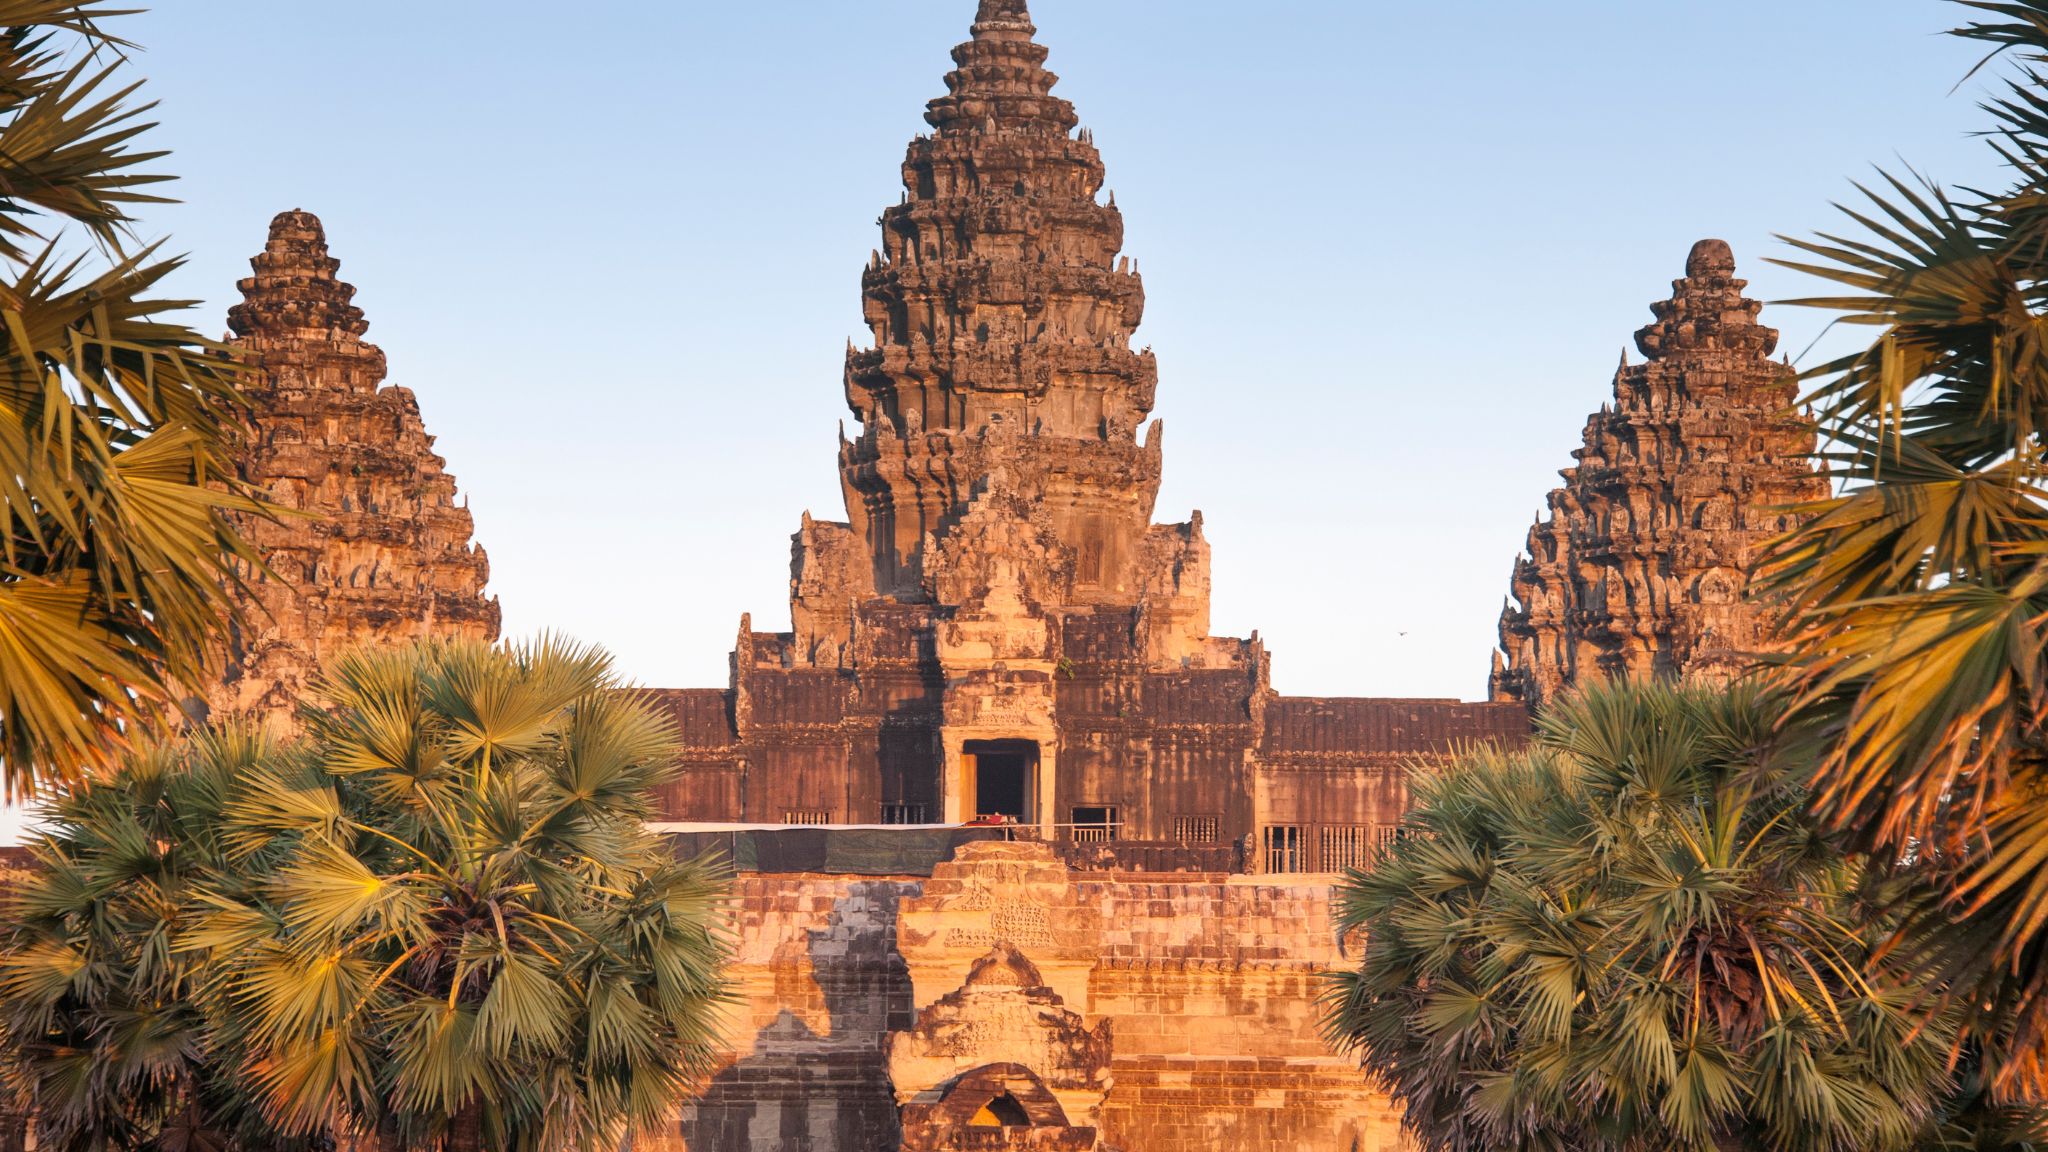 Day 2 Discover The Magnificent Temples Of Angkor